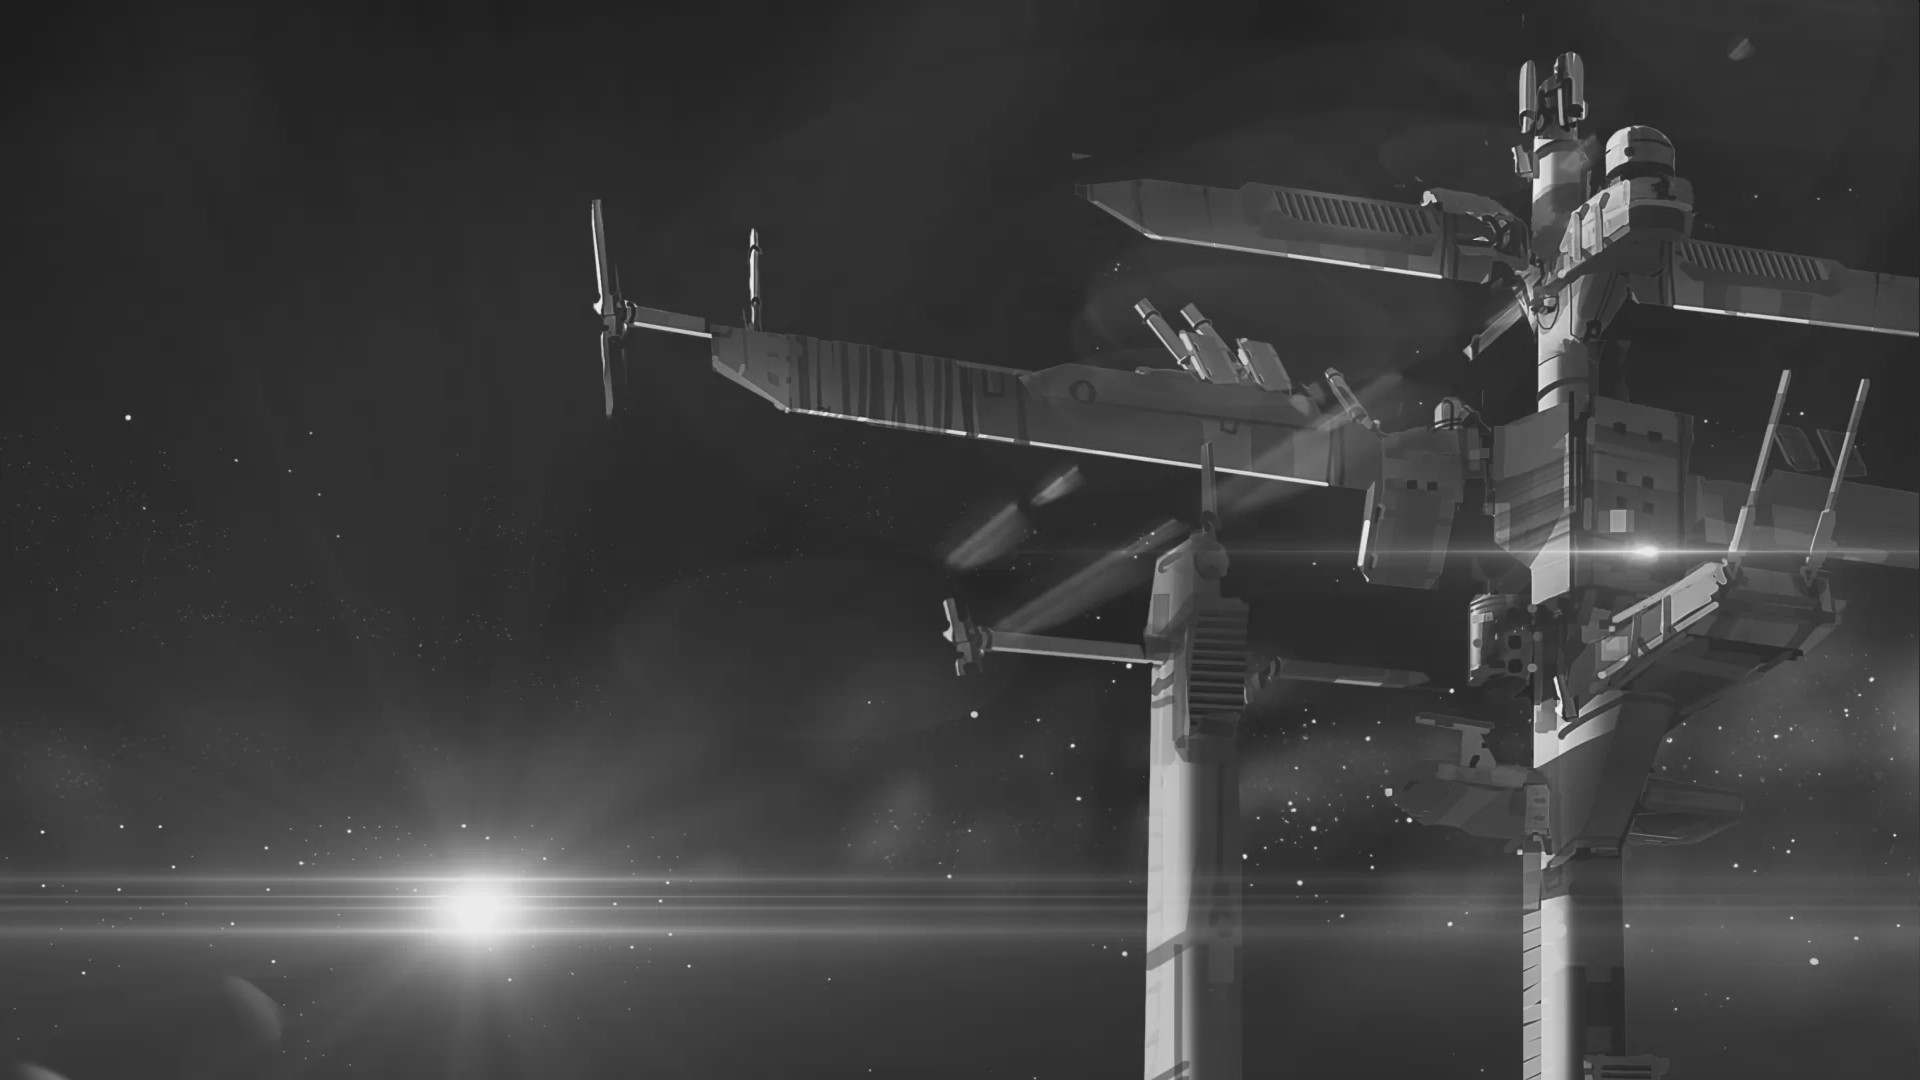 General 1920x1080 Homeworld PC gaming screen shot space station monochrome space